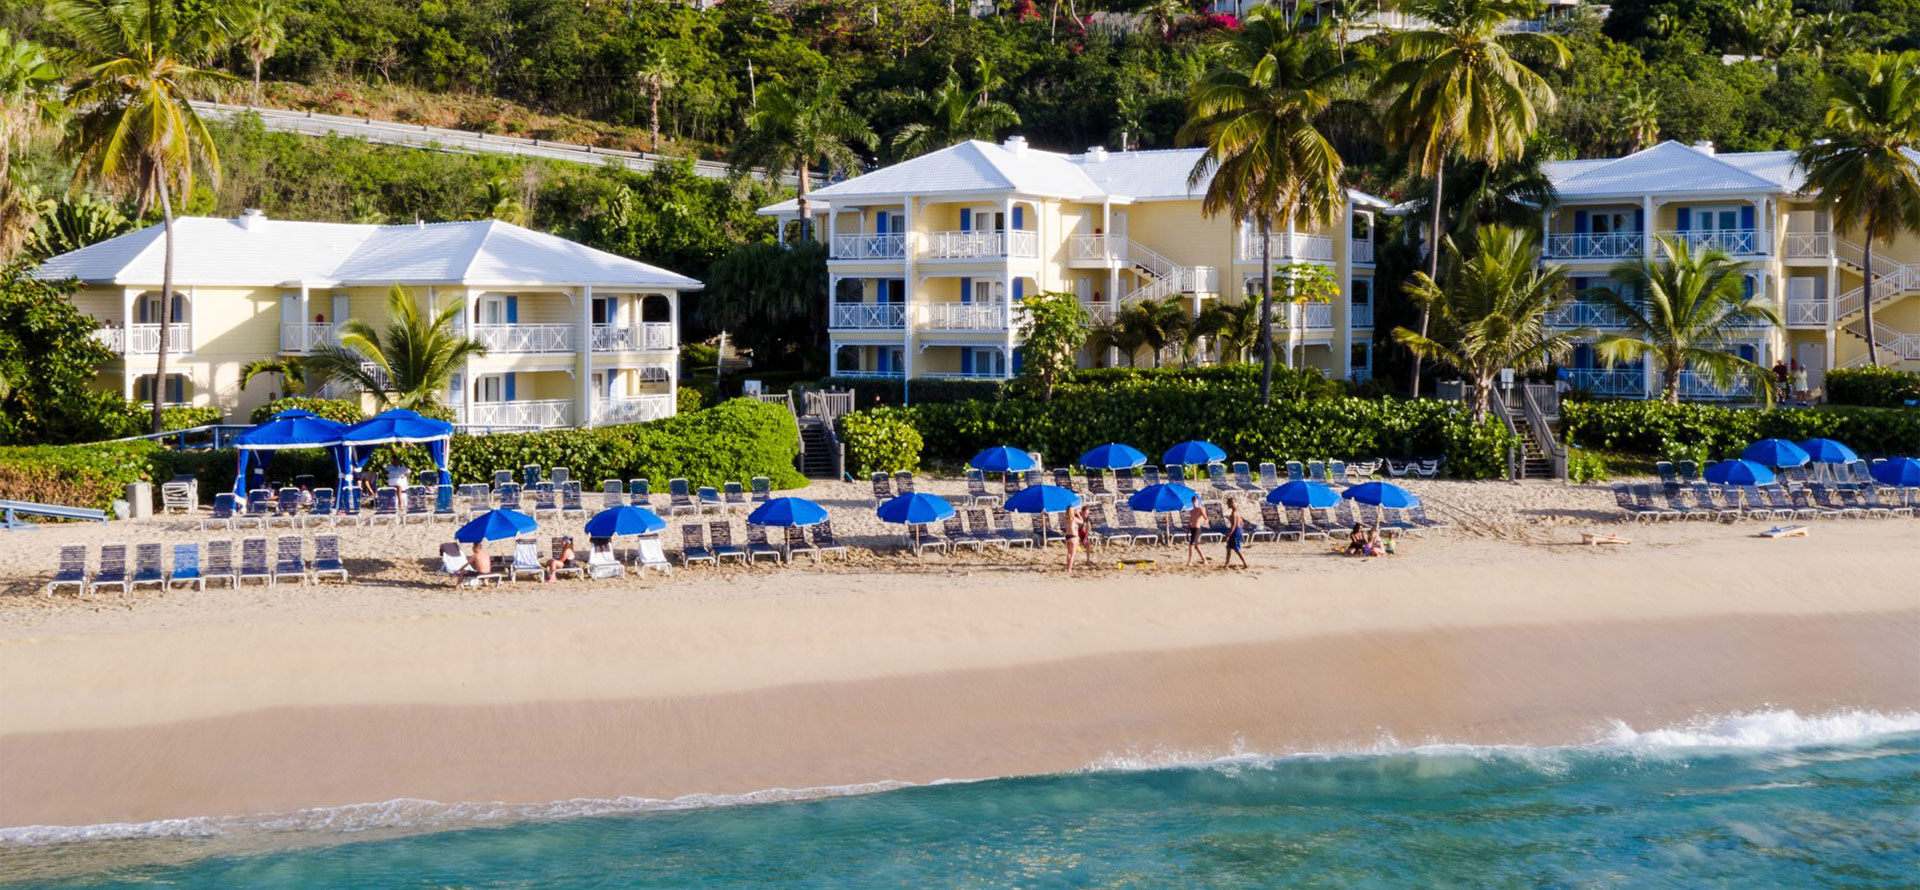 St thomas all-inclusive adults only resort and beach with palms.